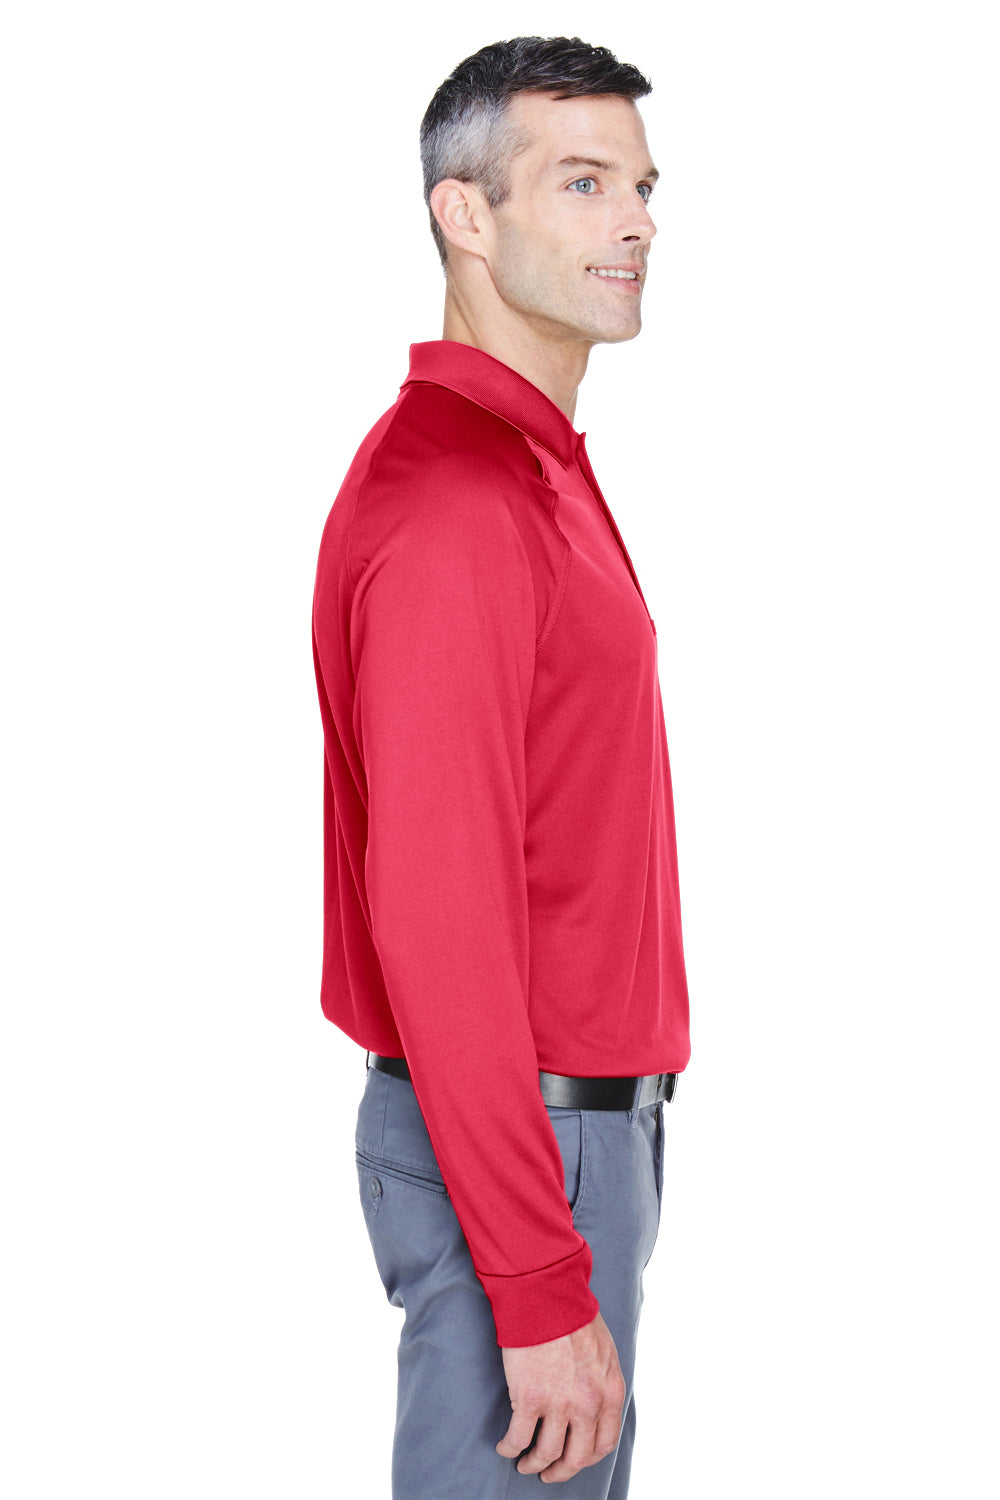 Harriton M211L Mens Advantage Tactical Moisture Wicking Long Sleeve Polo Shirt Red Side